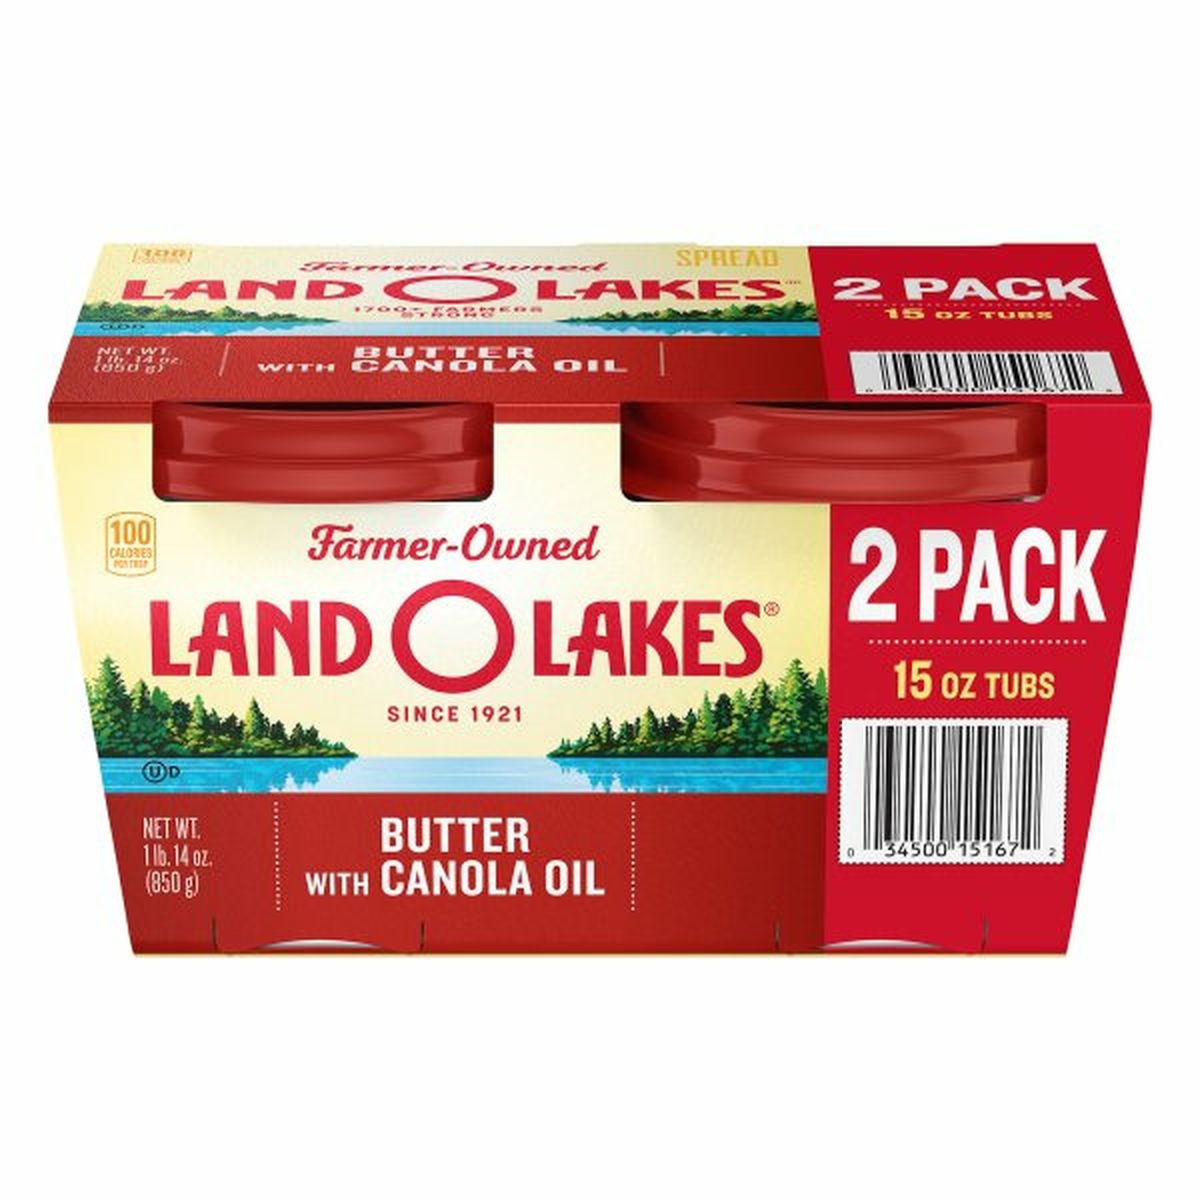 Calories in Land O Lakes Butter with Canola Oil, 2 Pack